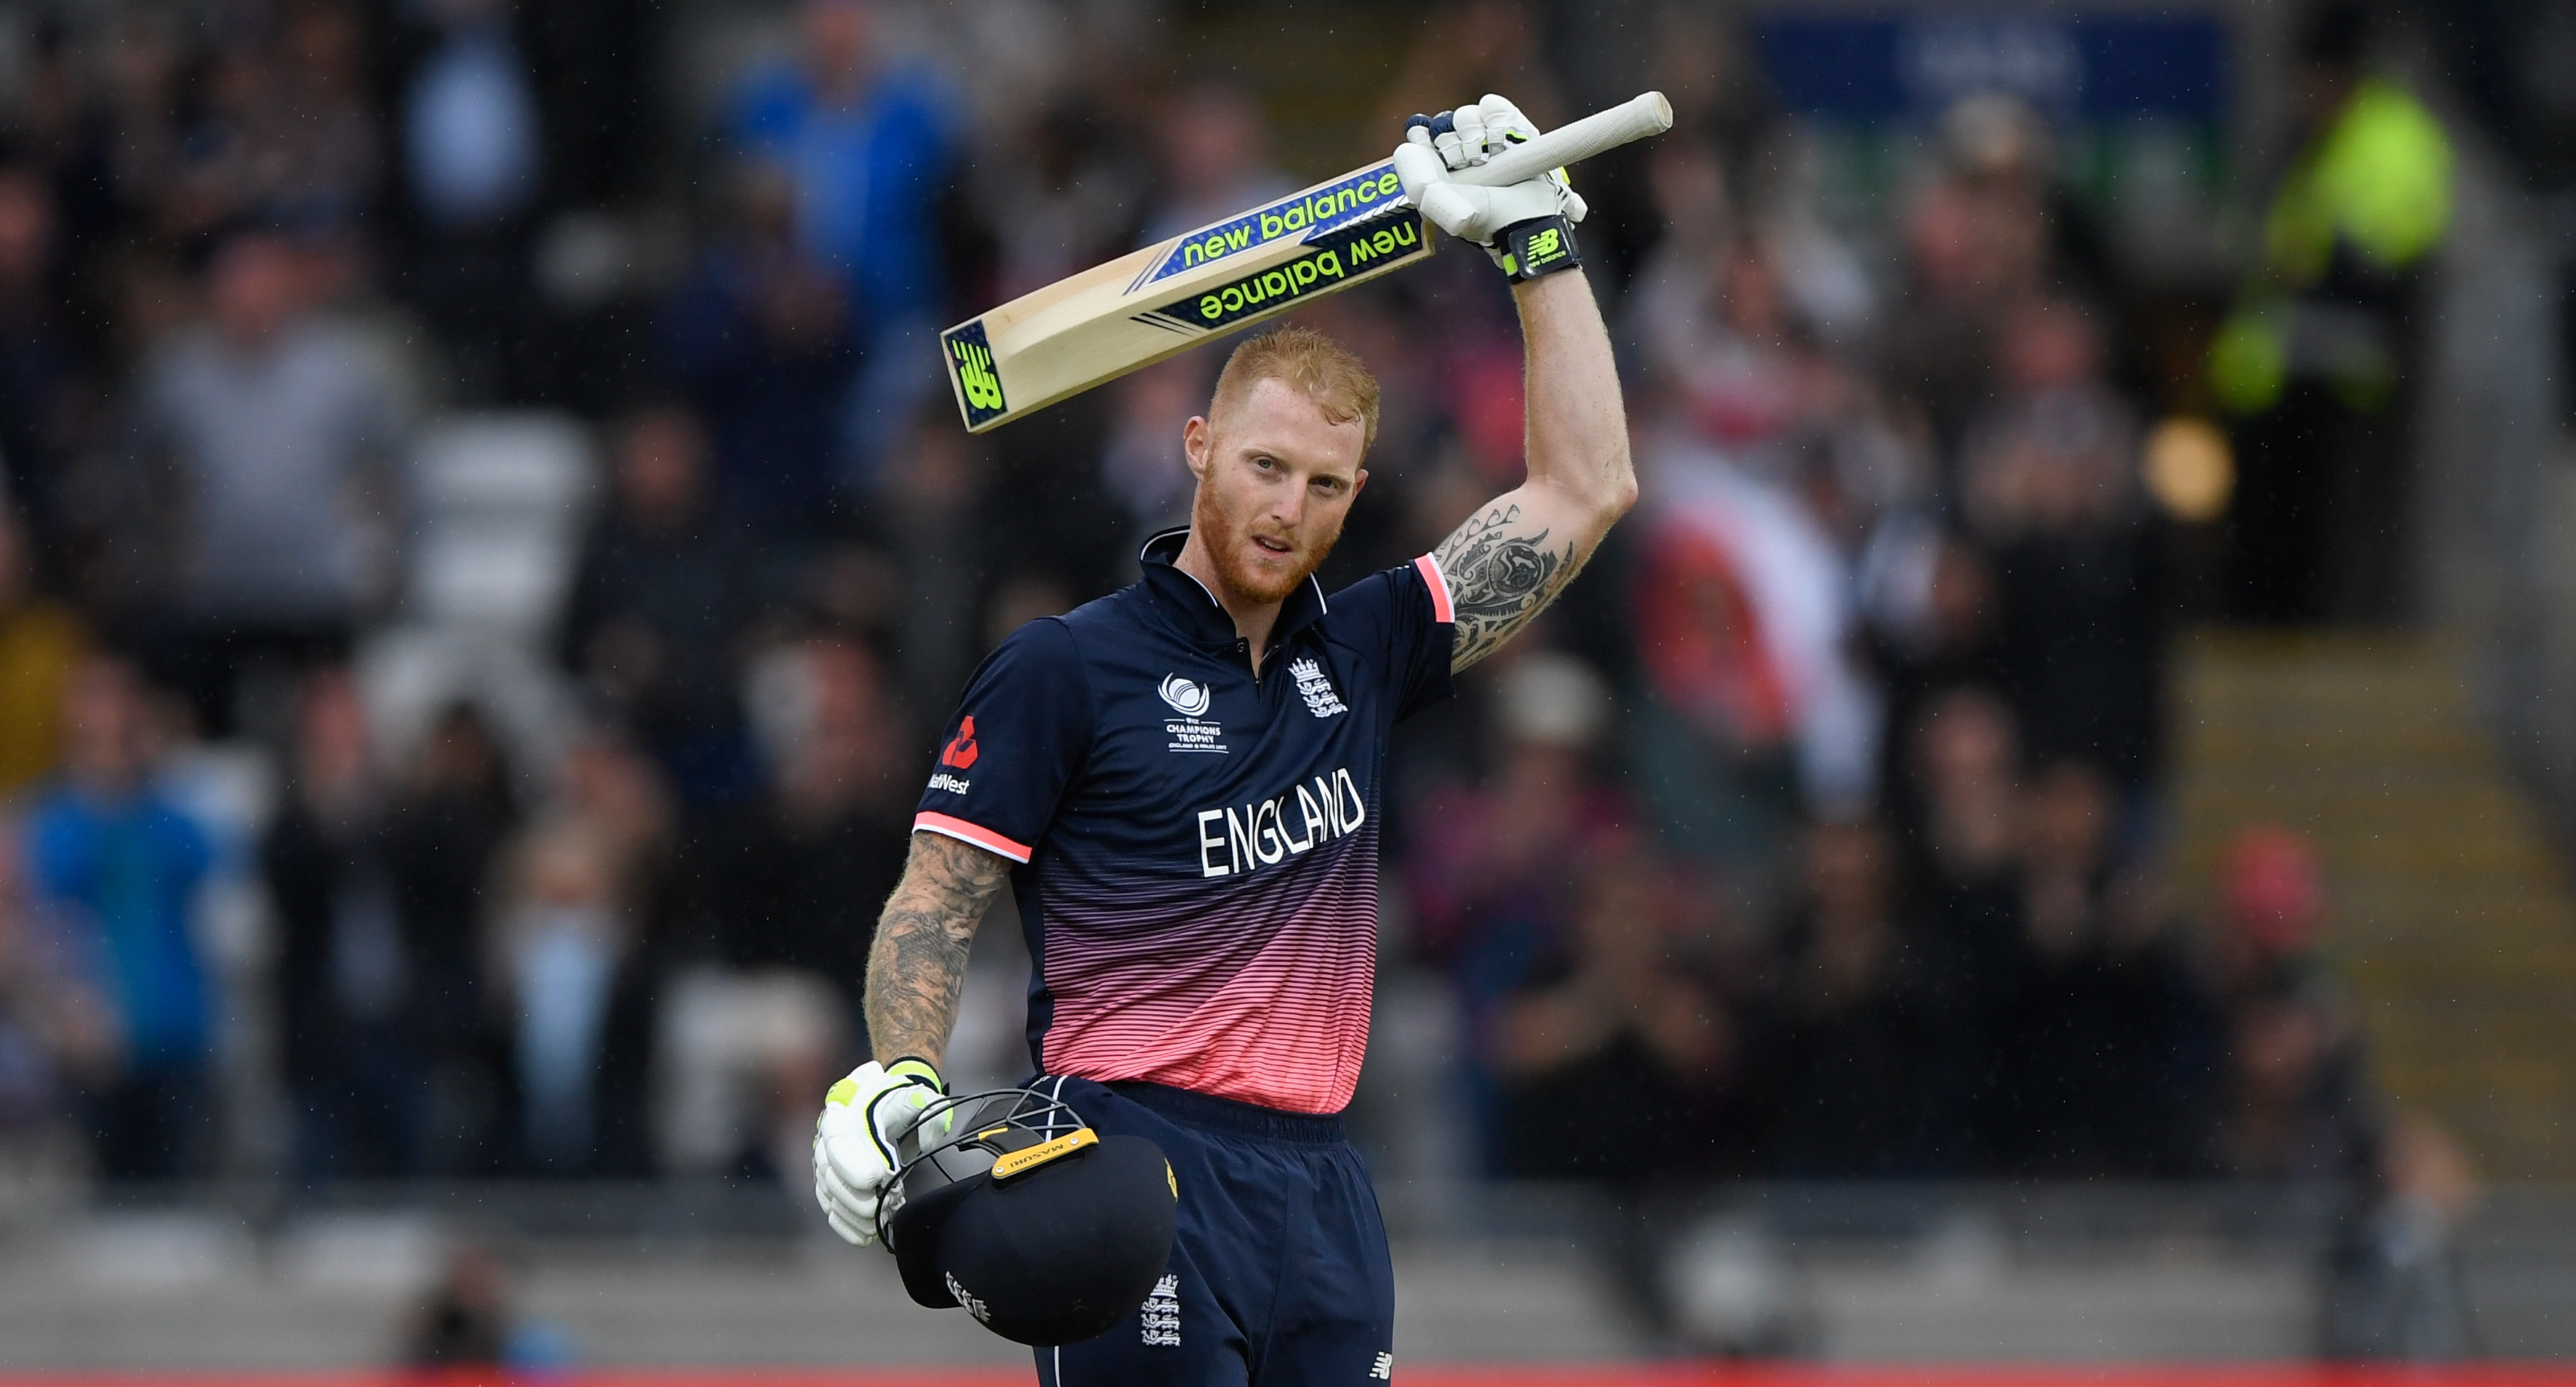 England will miss Ben Stokes' all-round contribution, admits Eoin Morgan